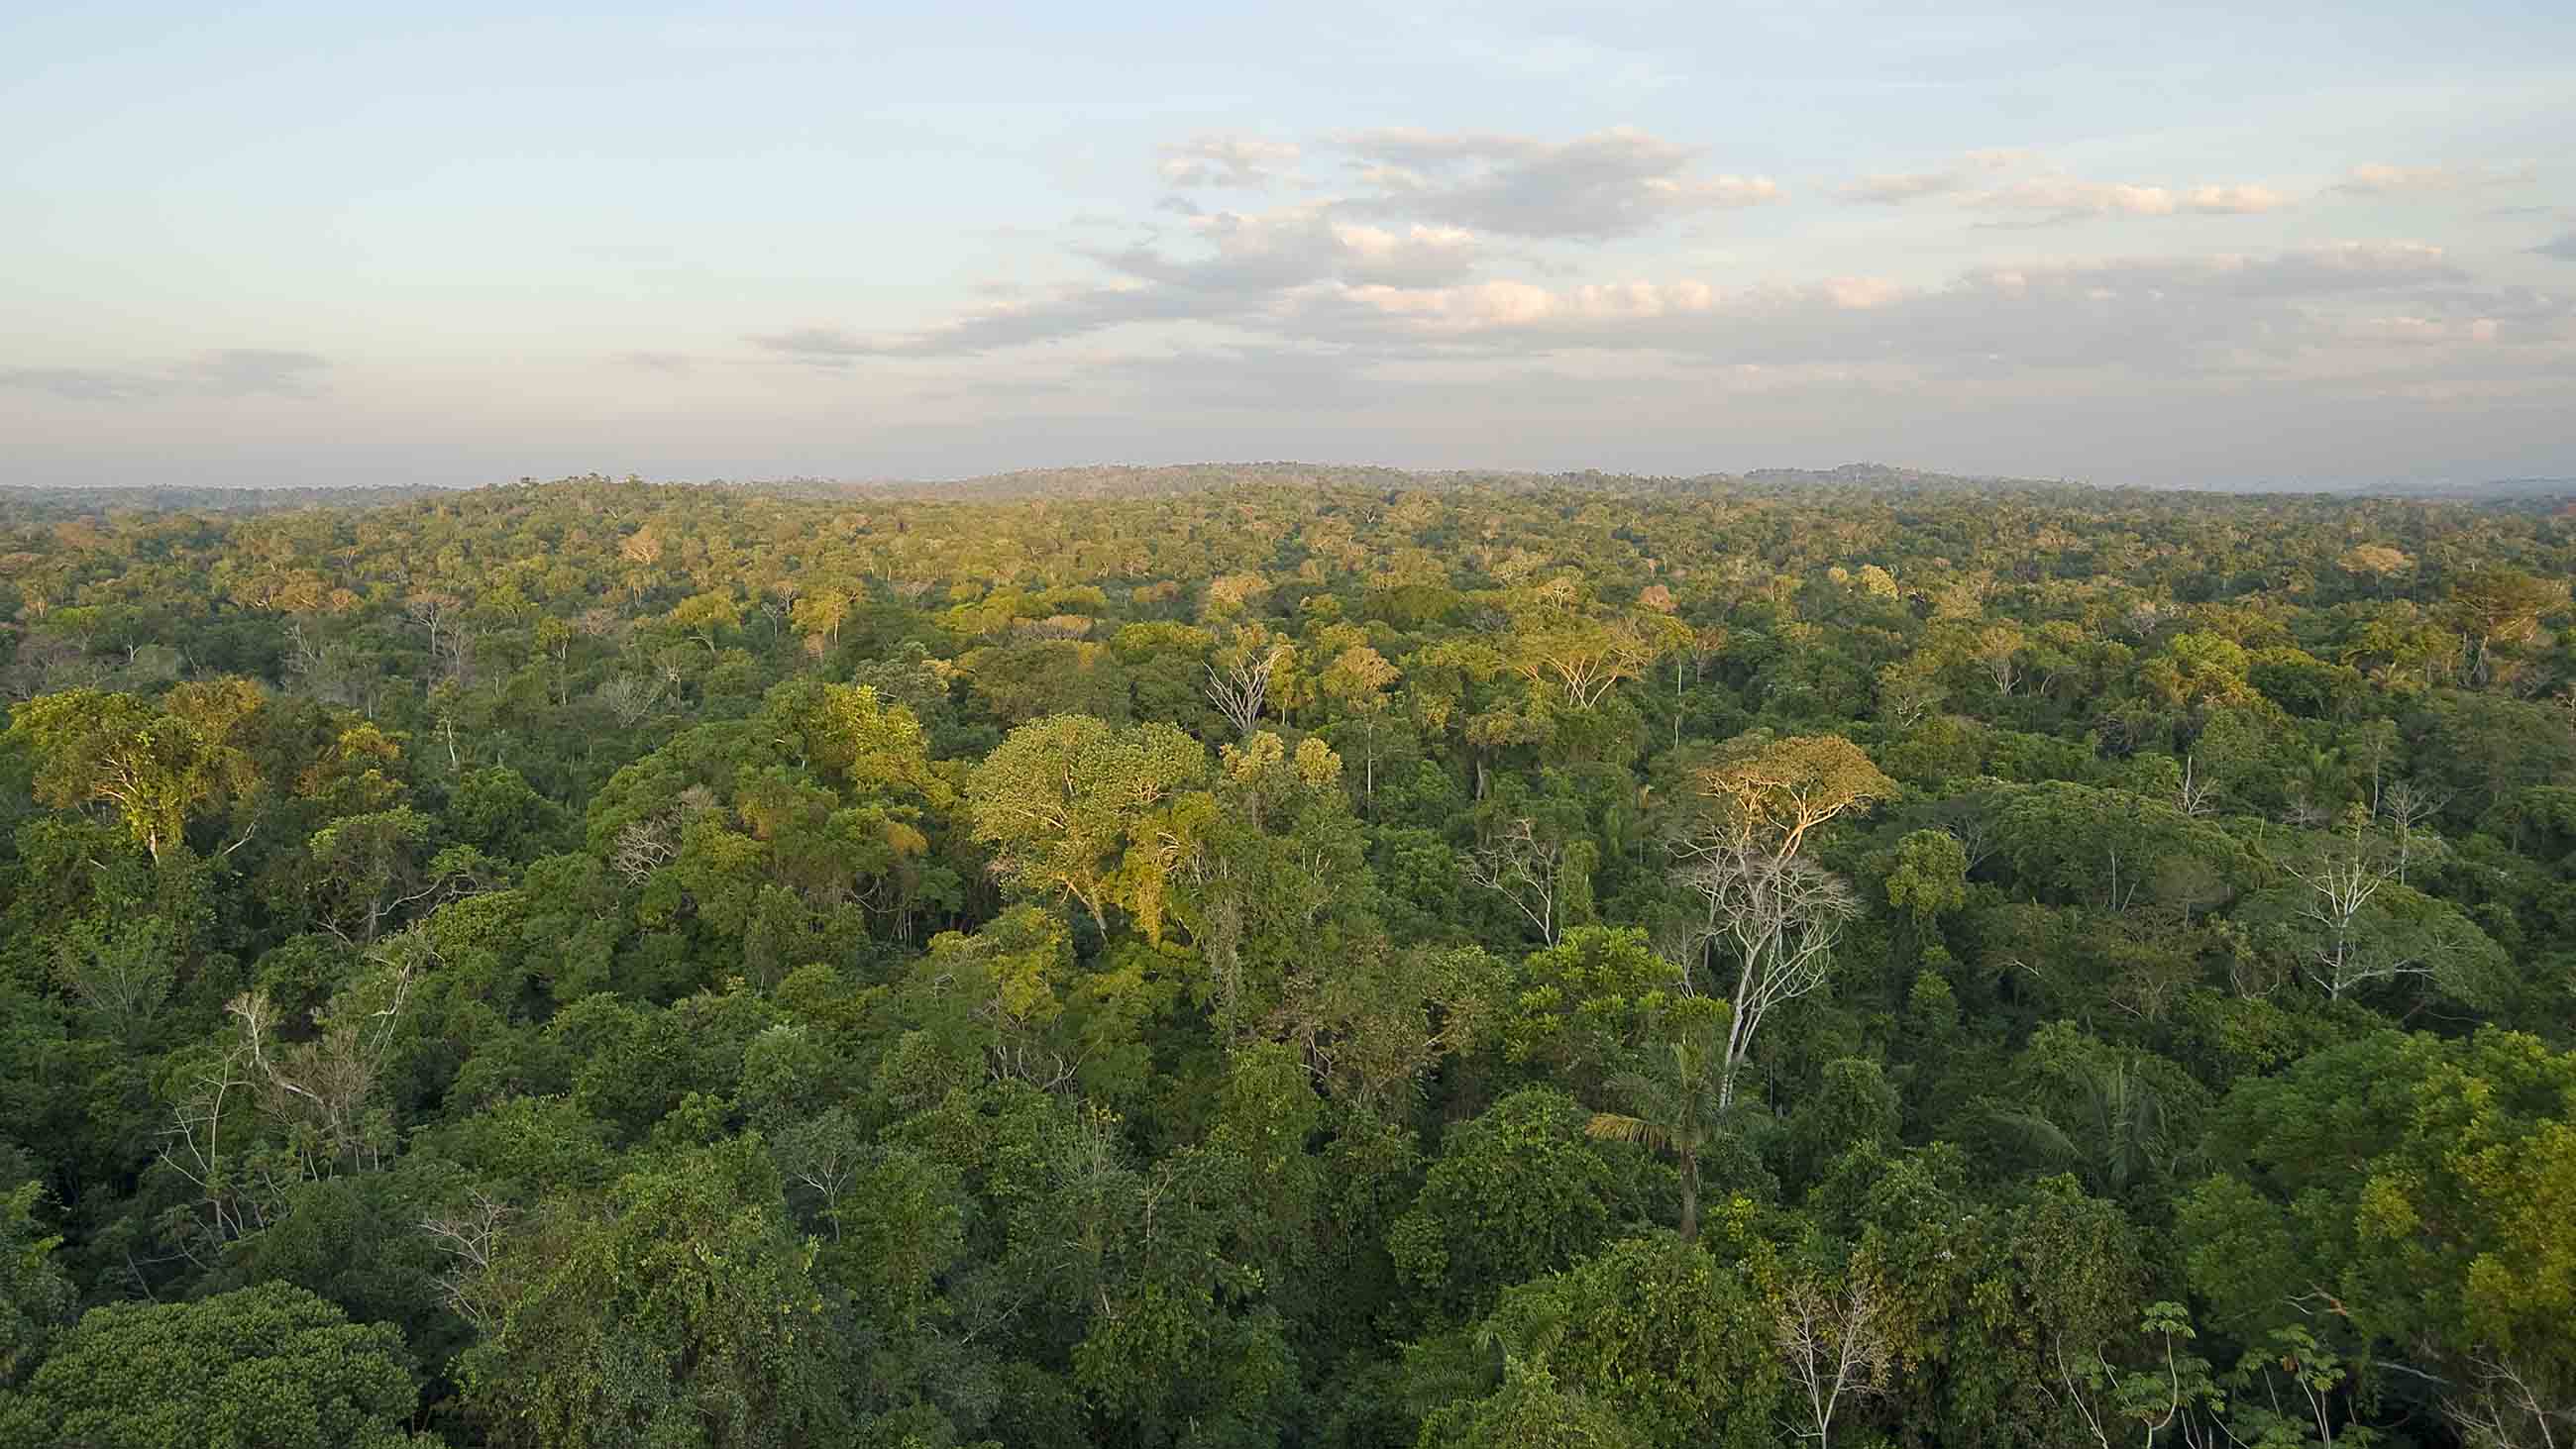 Scientists gain new insight into how indigenous peoples in the Amazon shaped their environment.